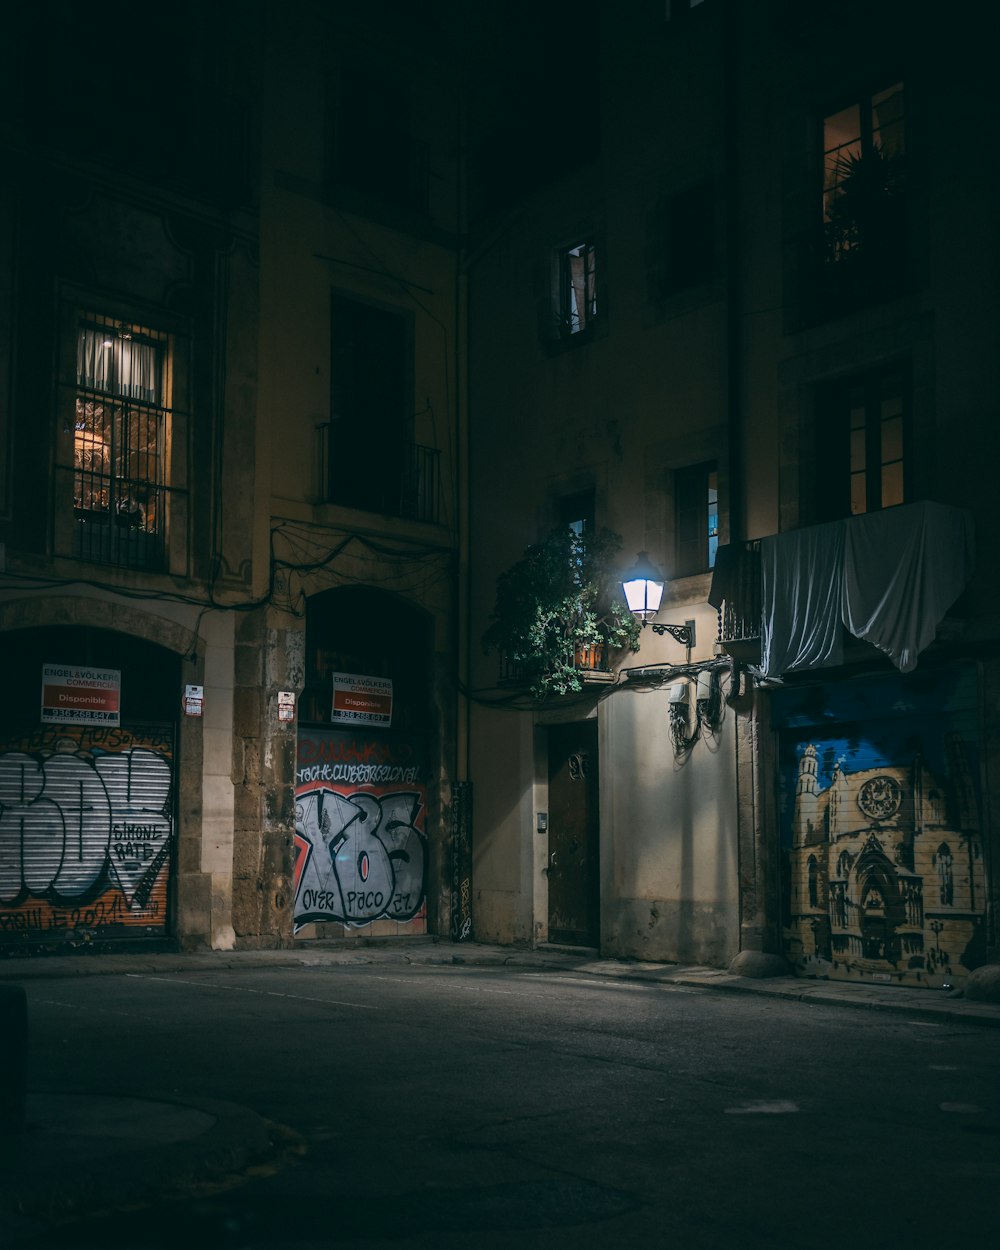 a dark street at night with graffiti on the buildings